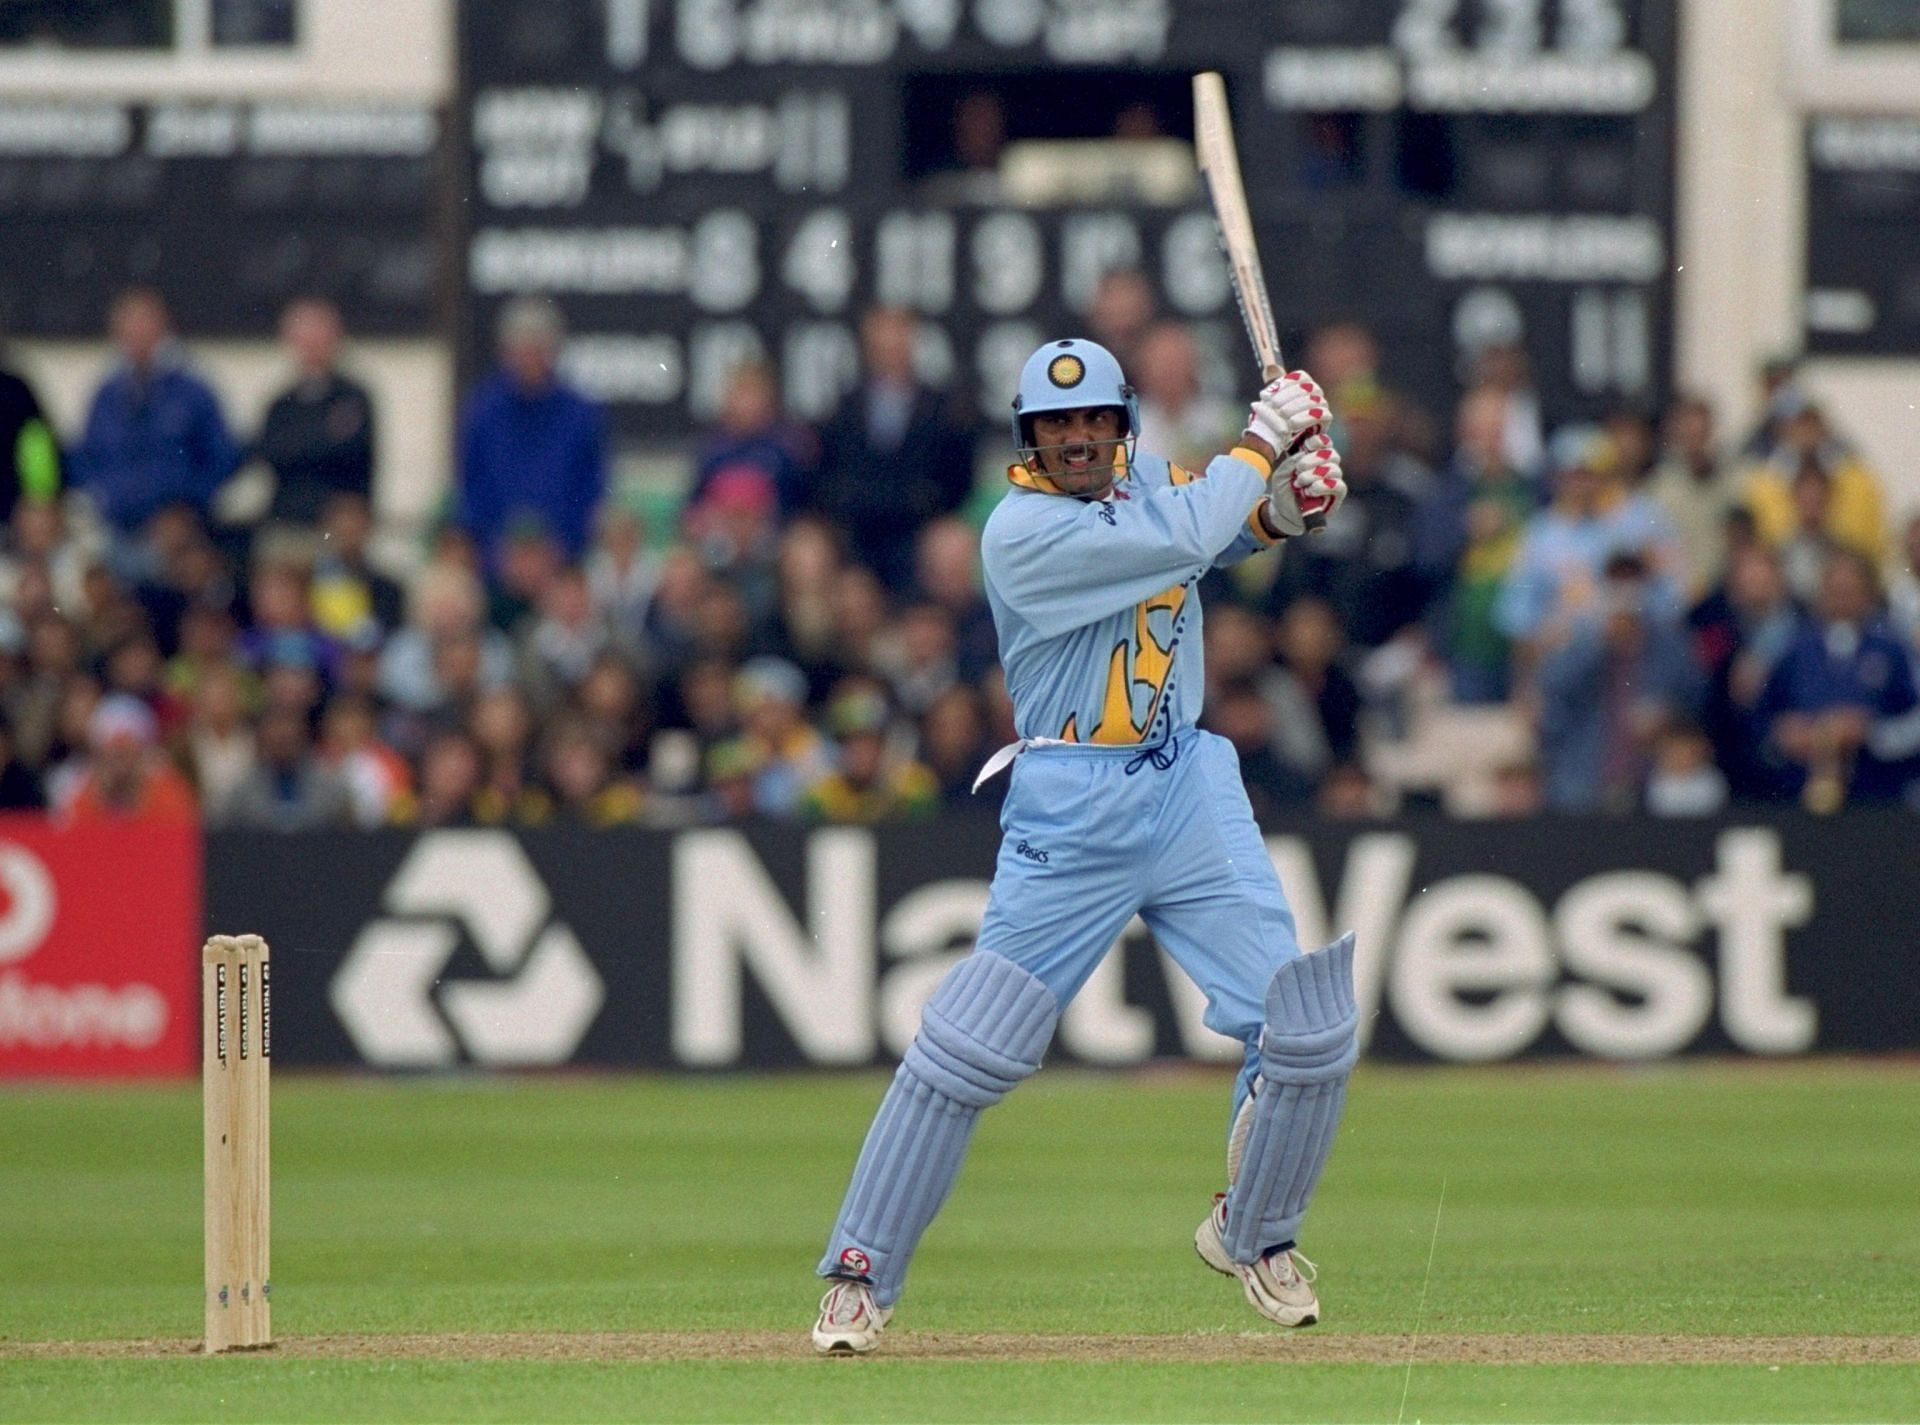 Cricket News: R Sridhar says "Azhar from 1985 to 1990 would still be a great fielder today"